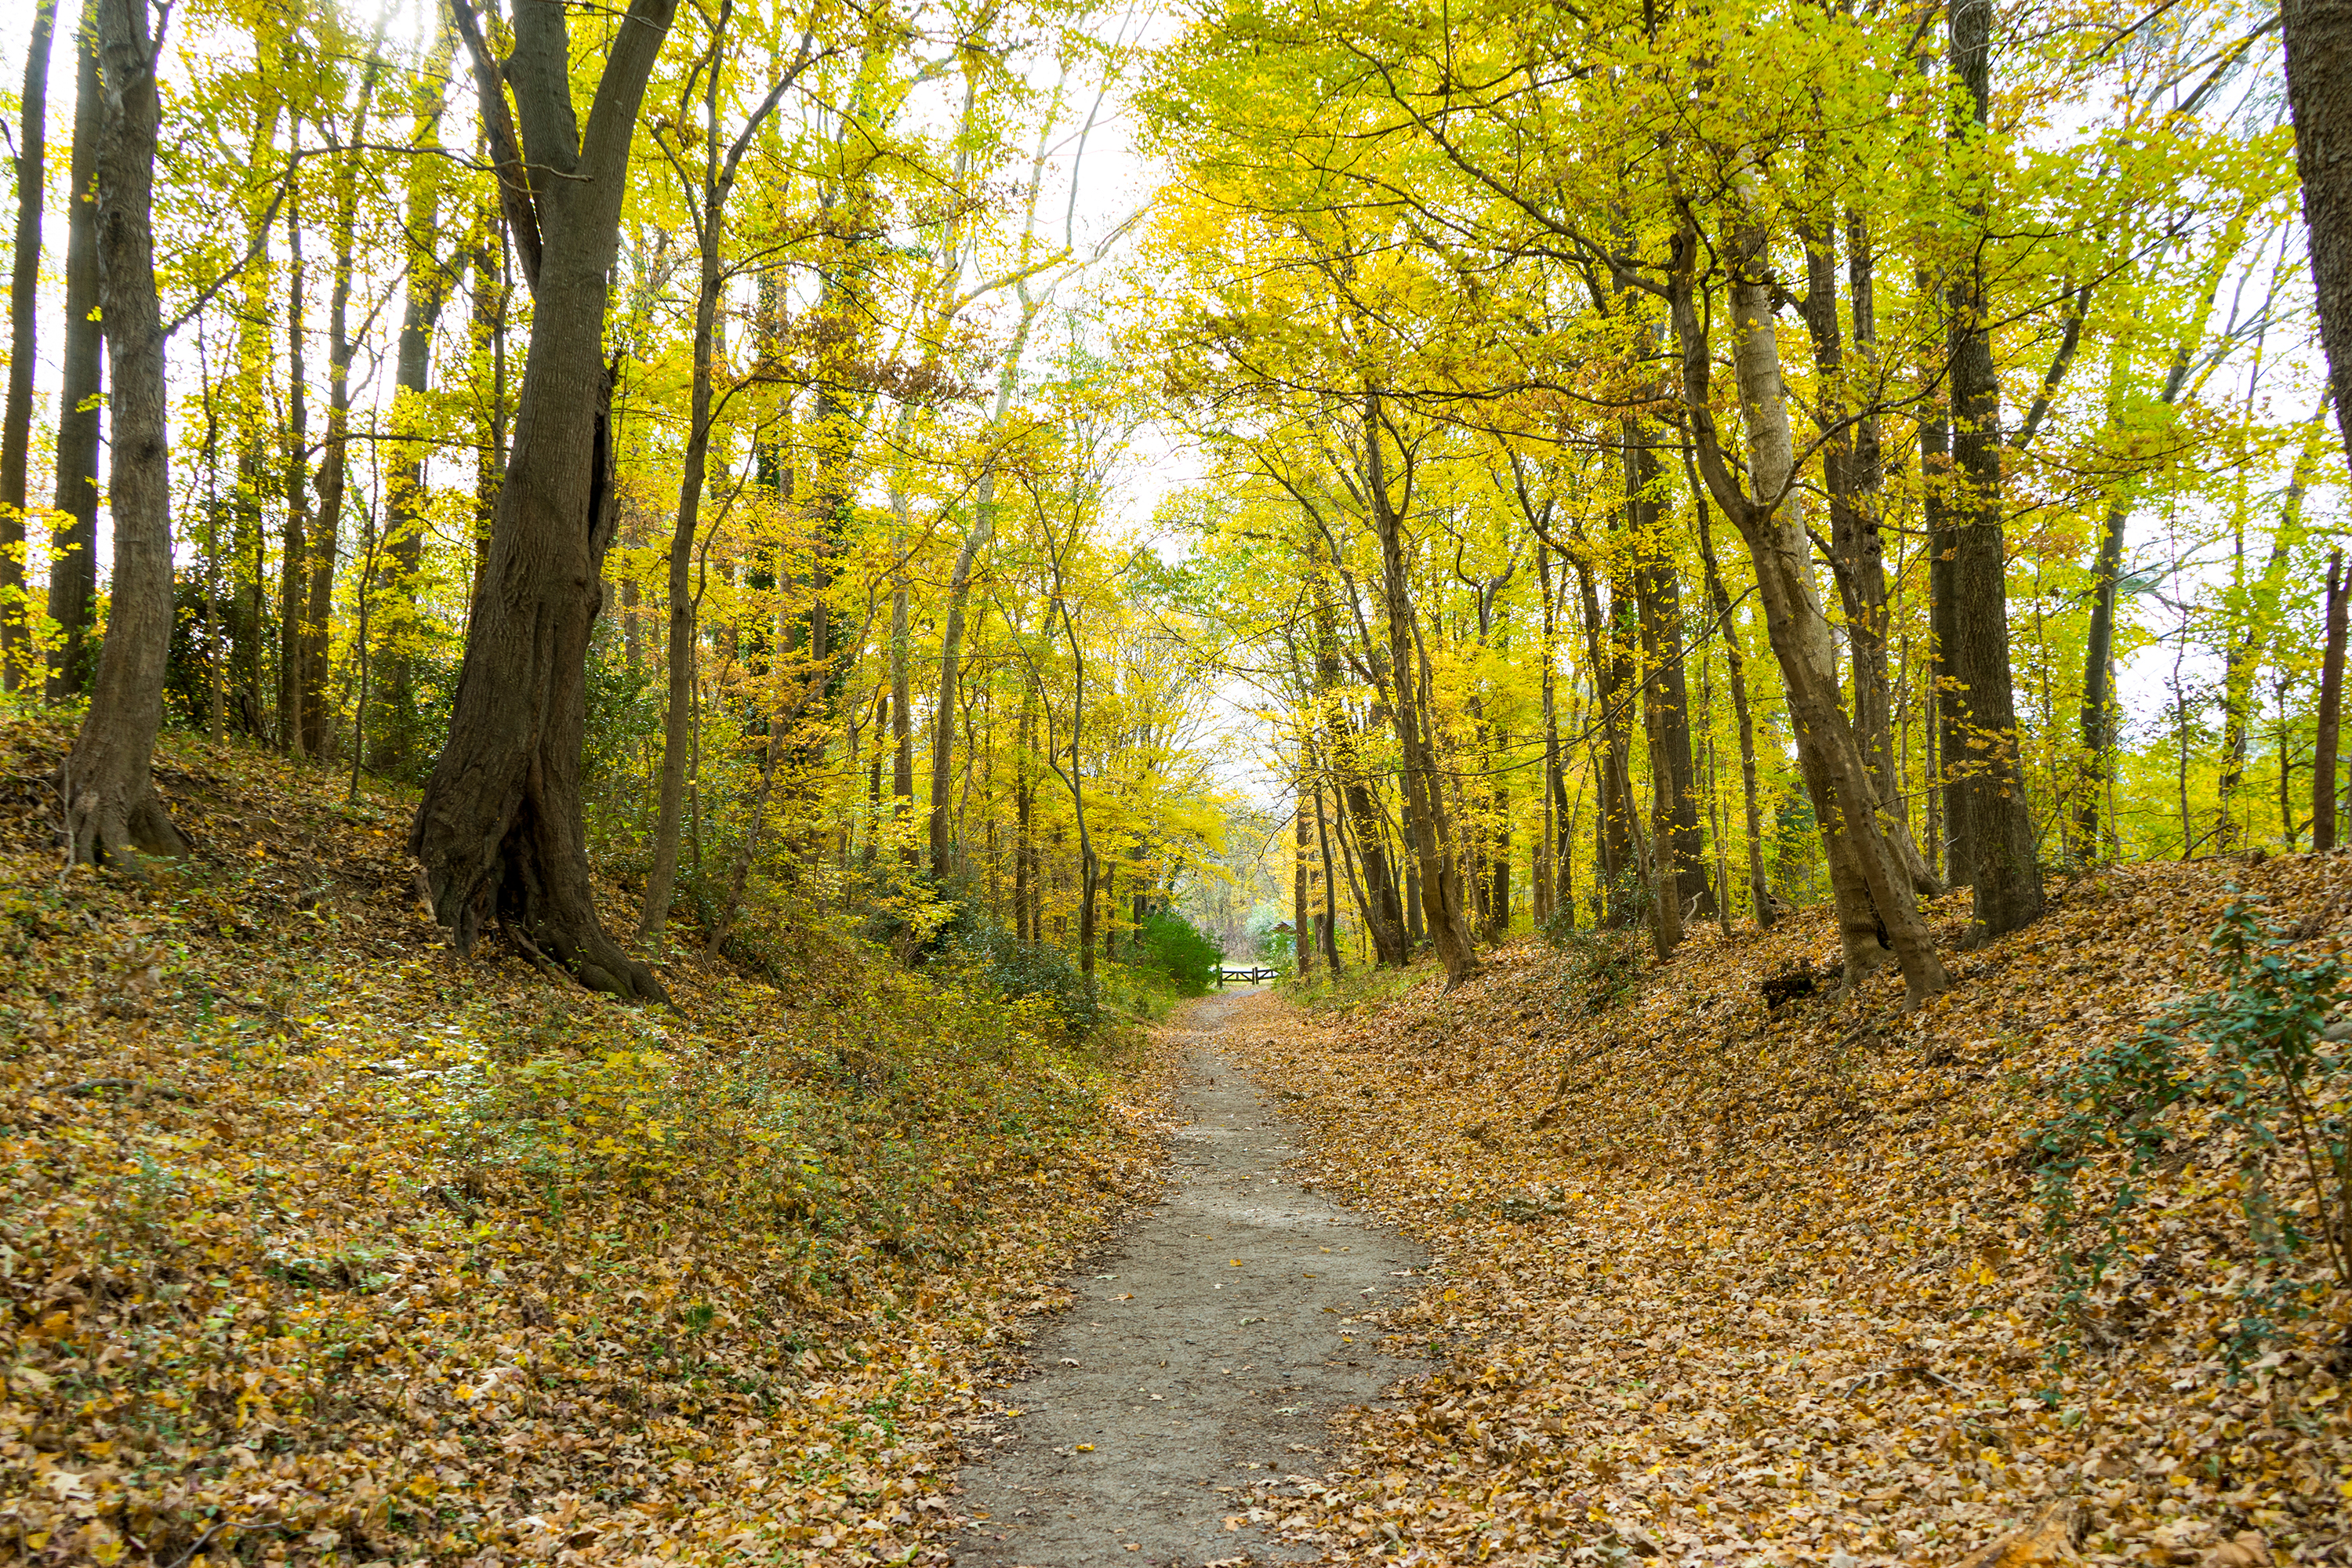 Explore the Roanoke Canal Trail, Medoc Mountain State Park, and more Halifax County Trails.